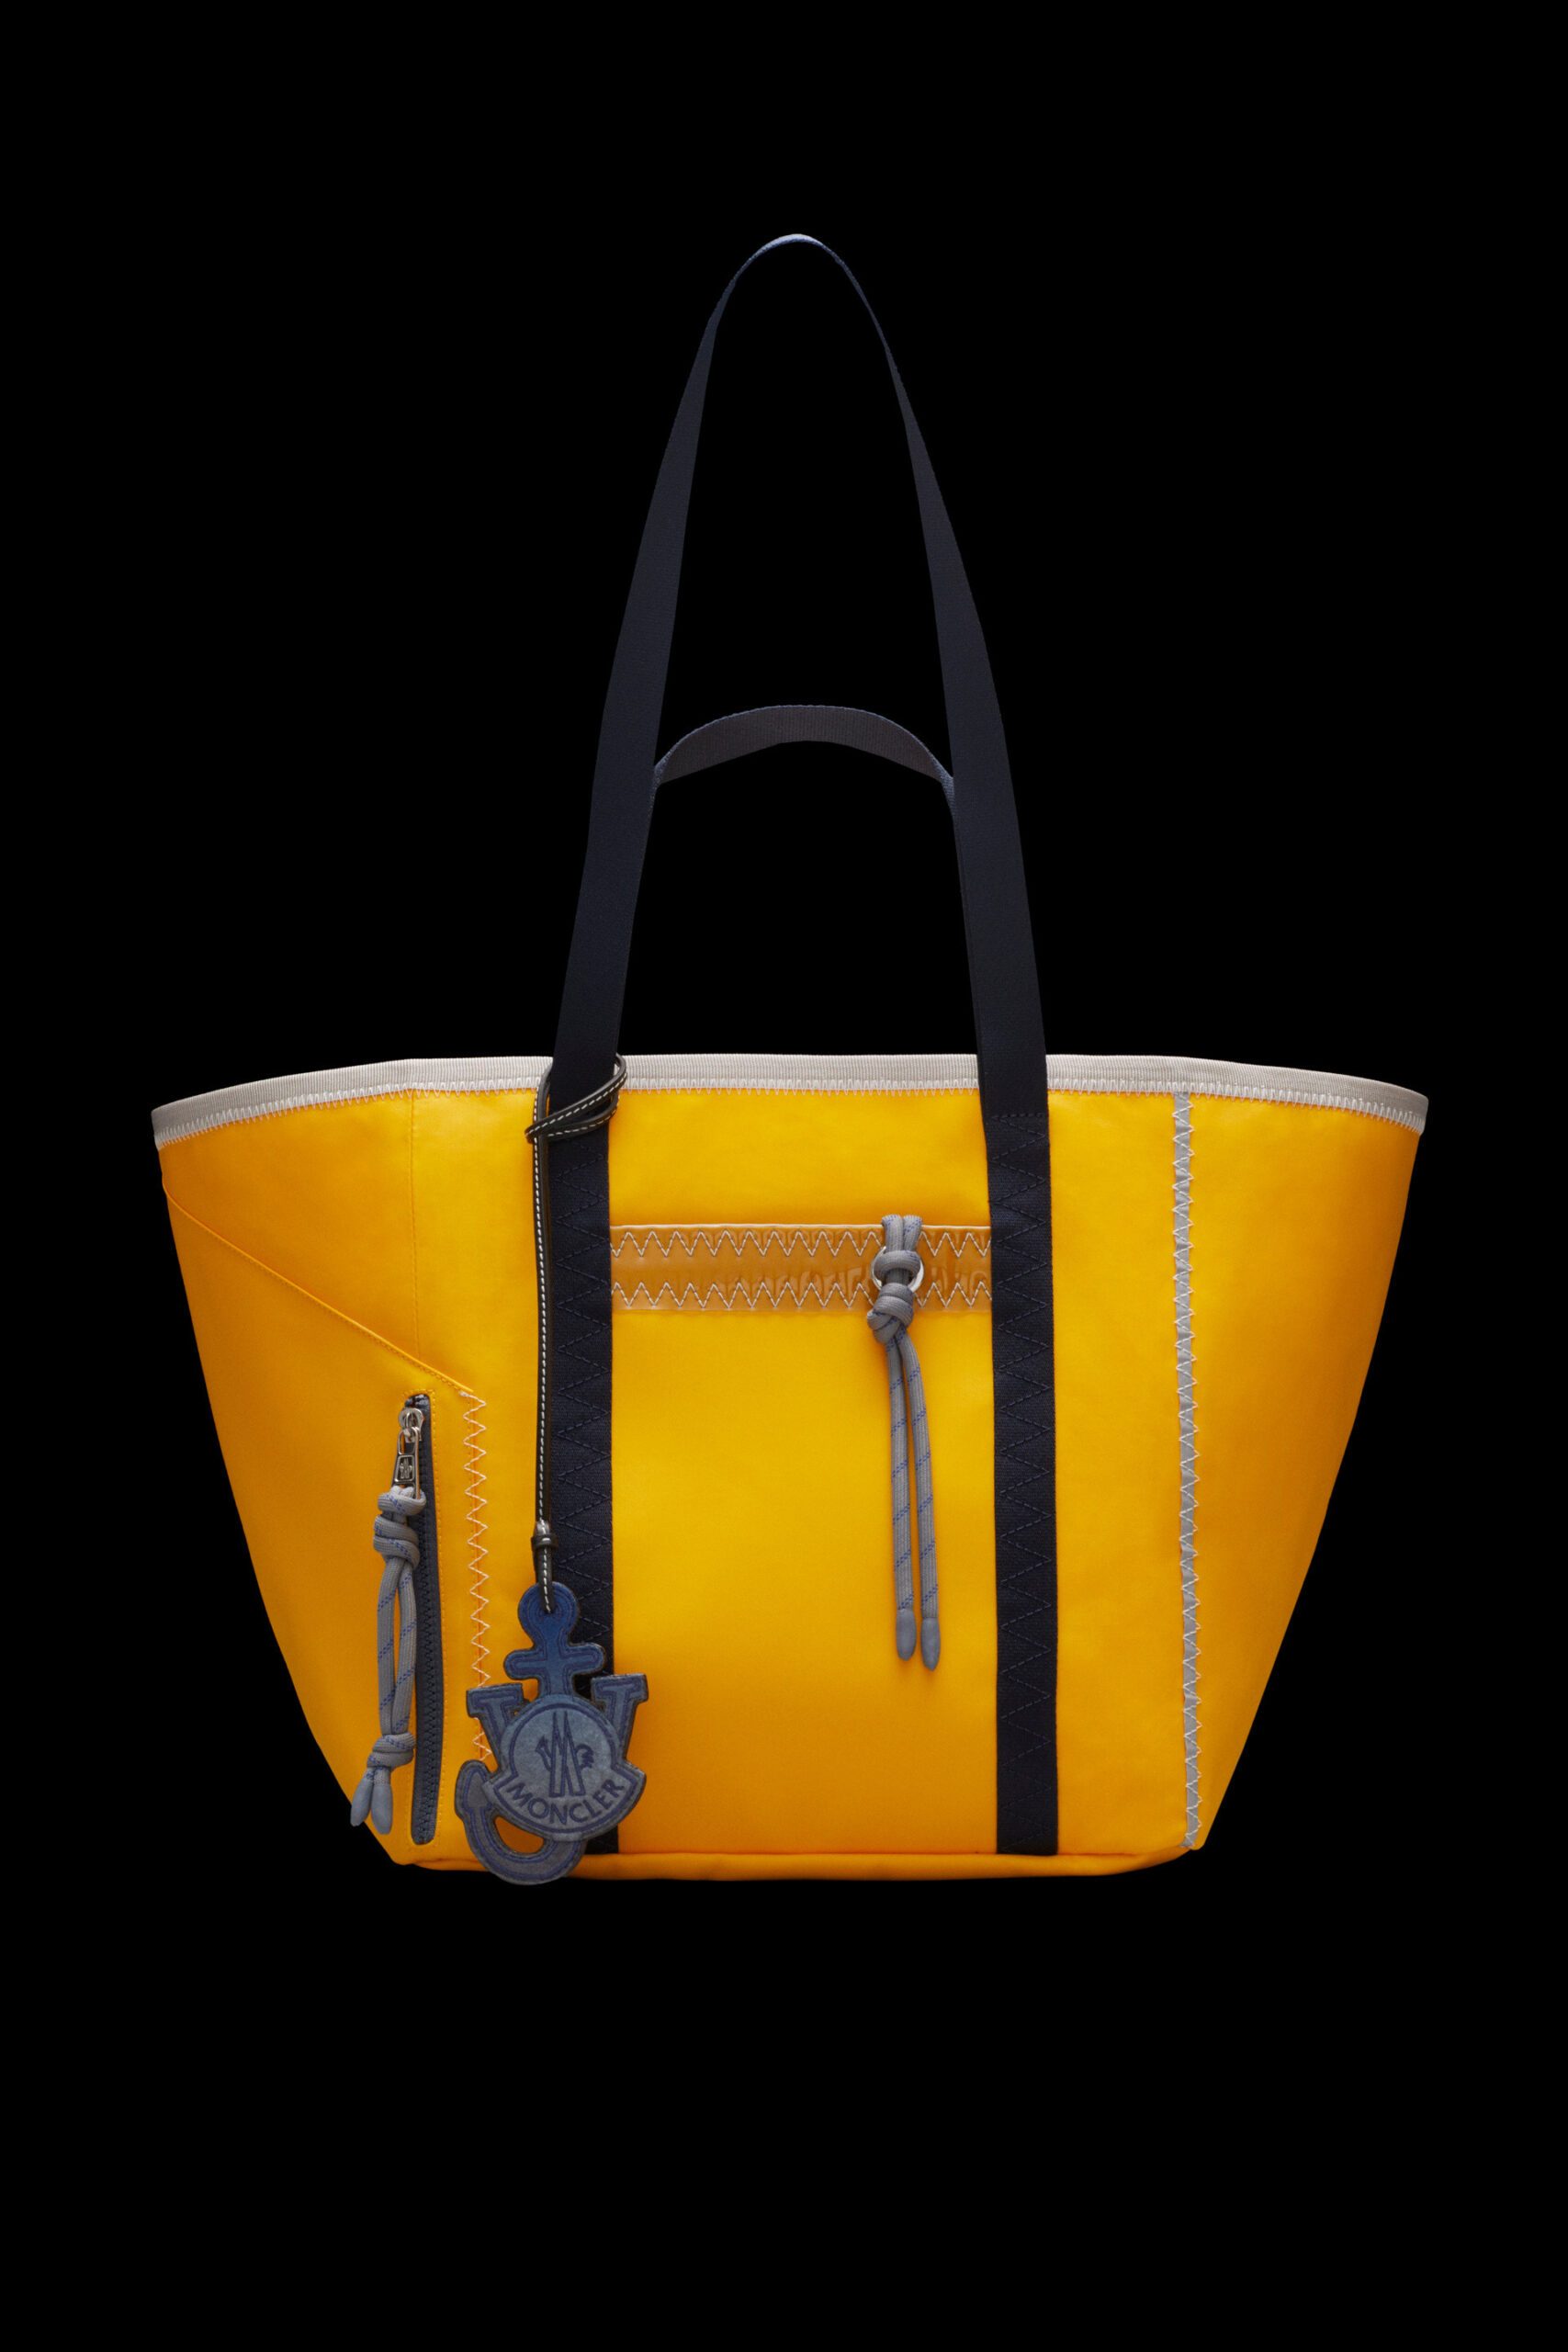 mens style guide boat theme yellow tote